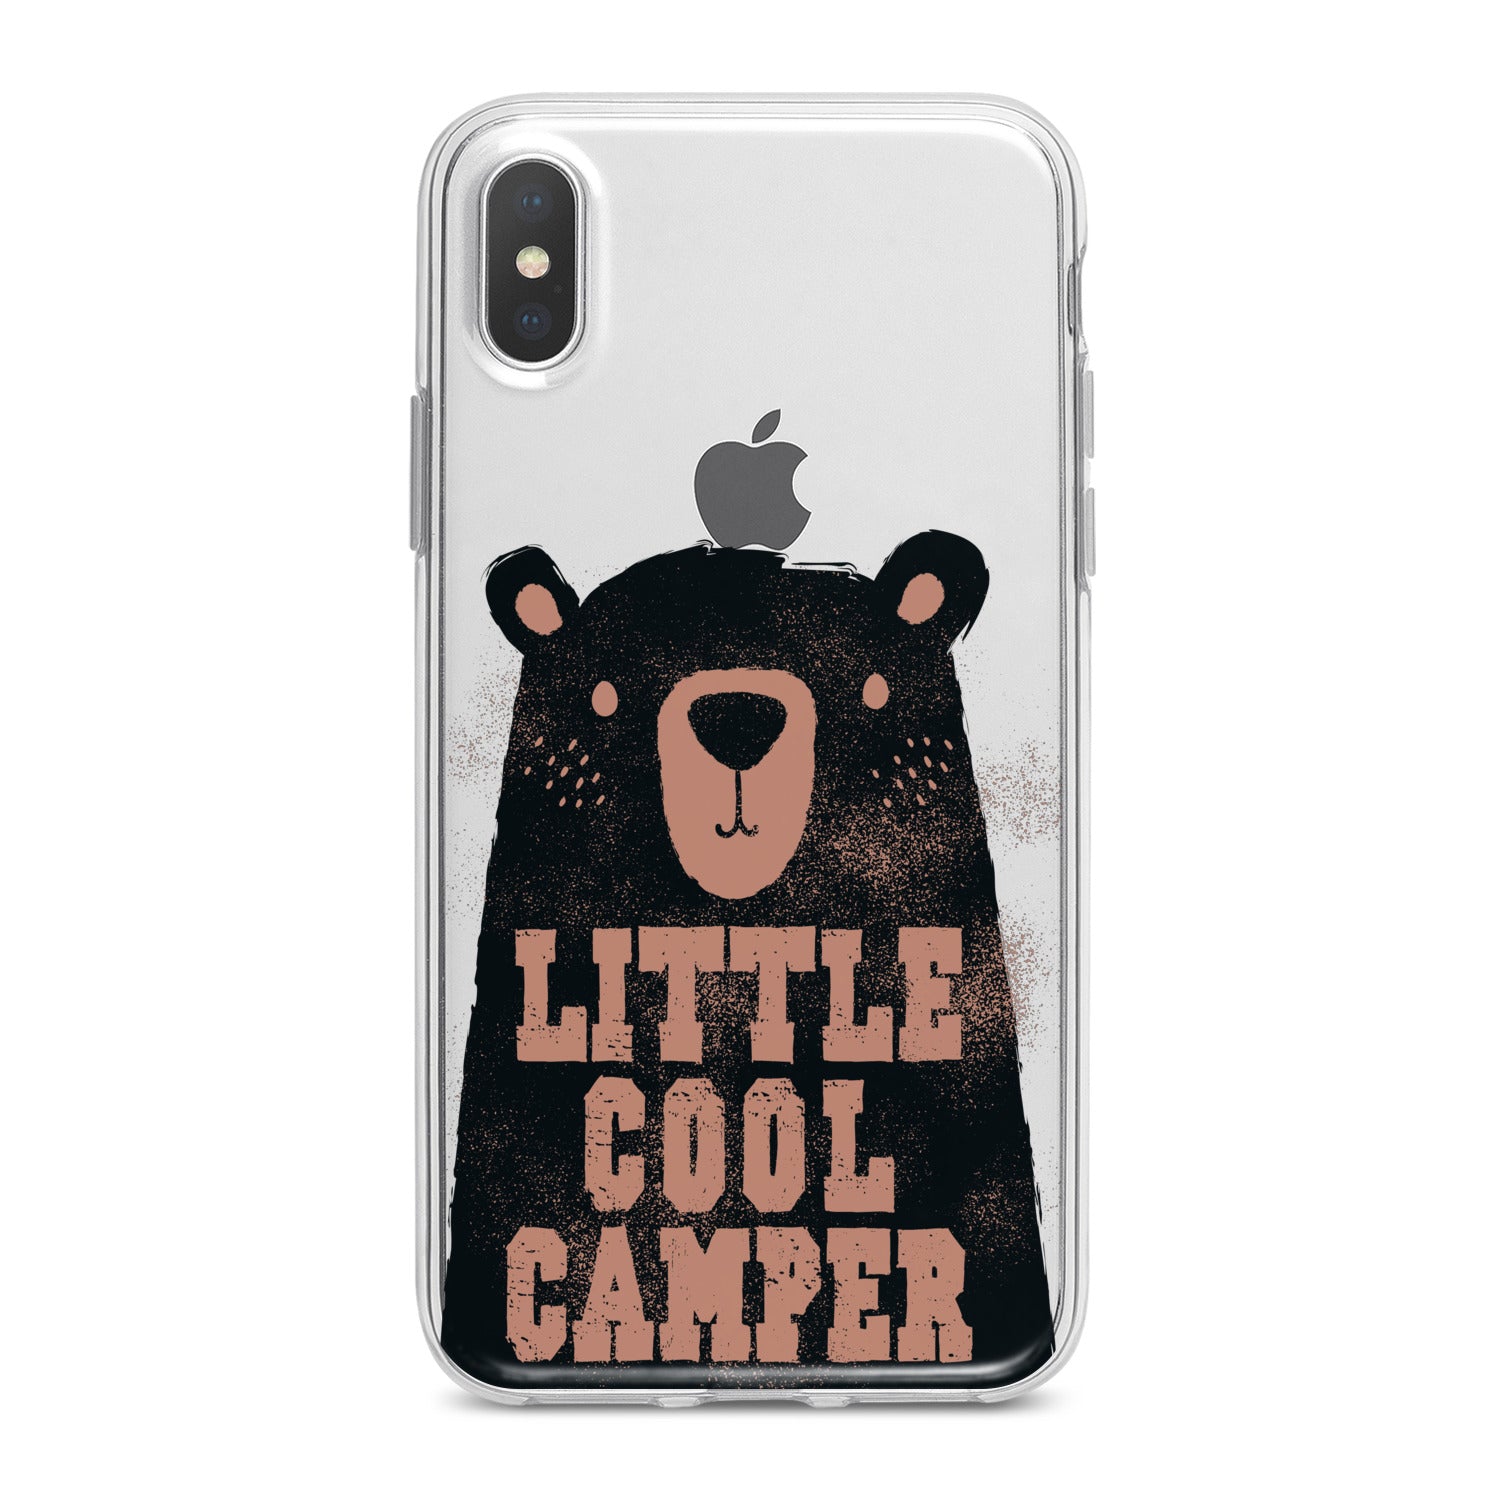 Lex Altern Bear Camper Phone Case for your iPhone & Android phone.